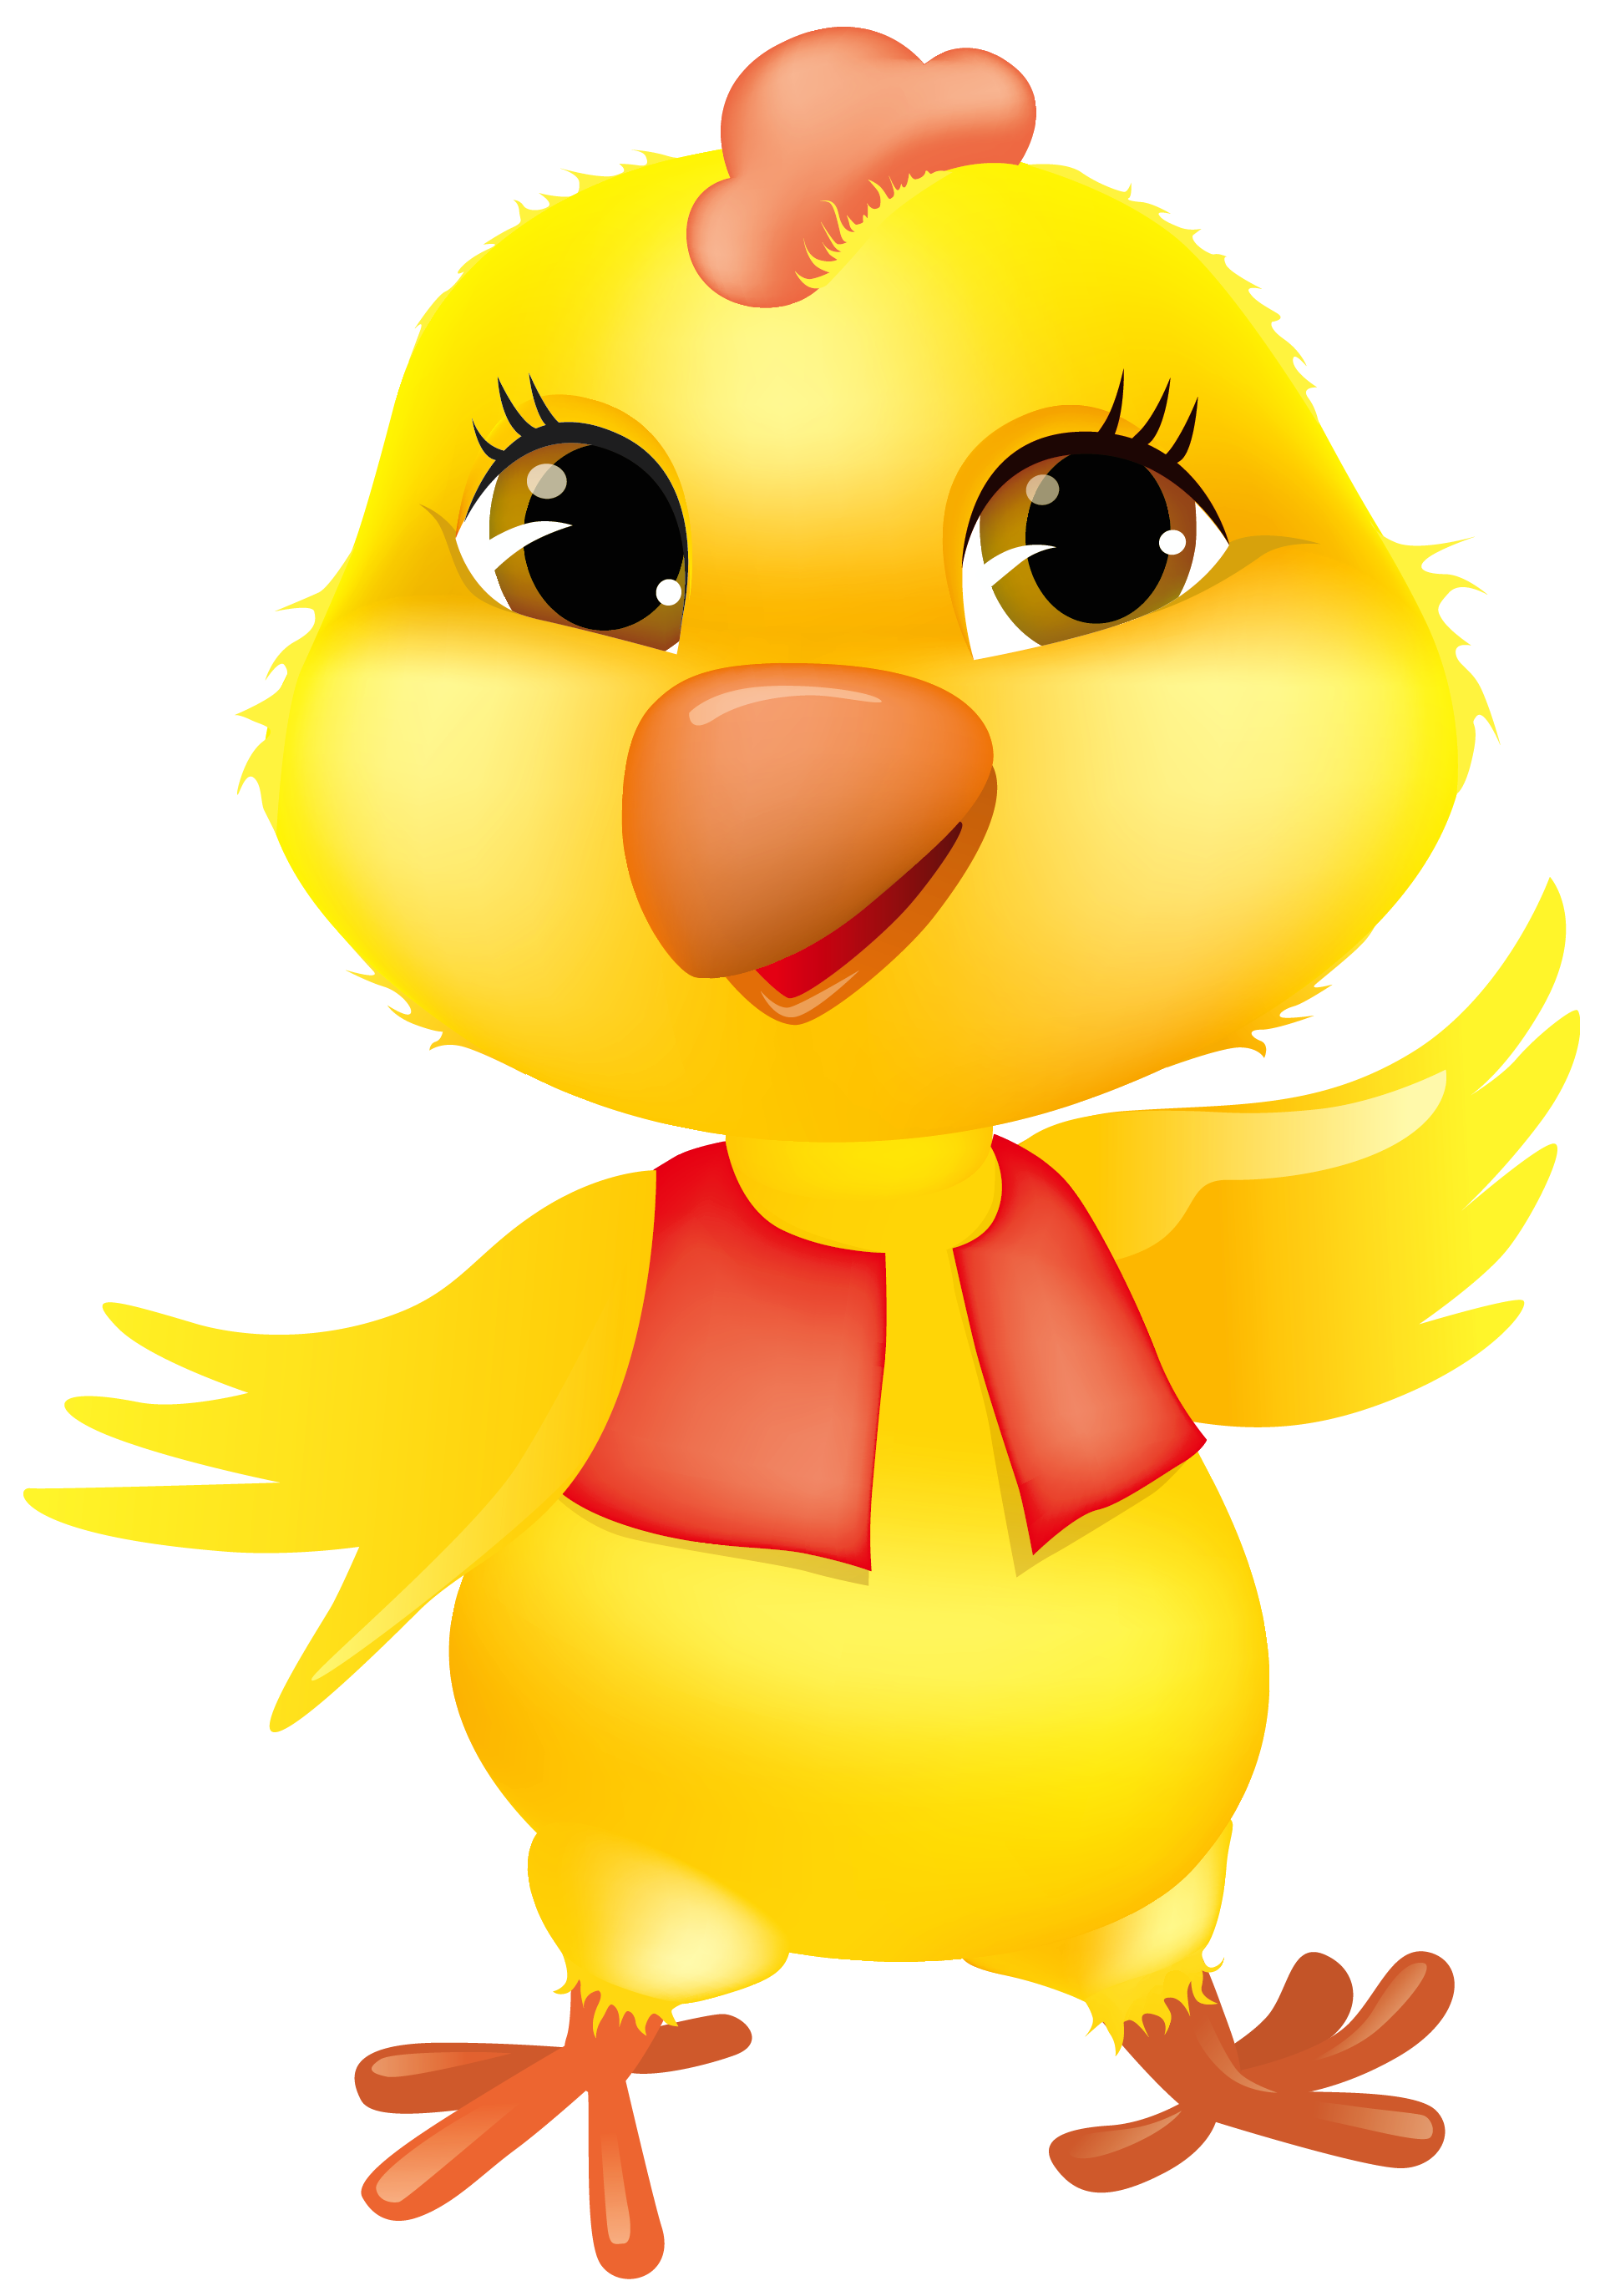 Chicken egg clipart chick brown clip art image 2 2